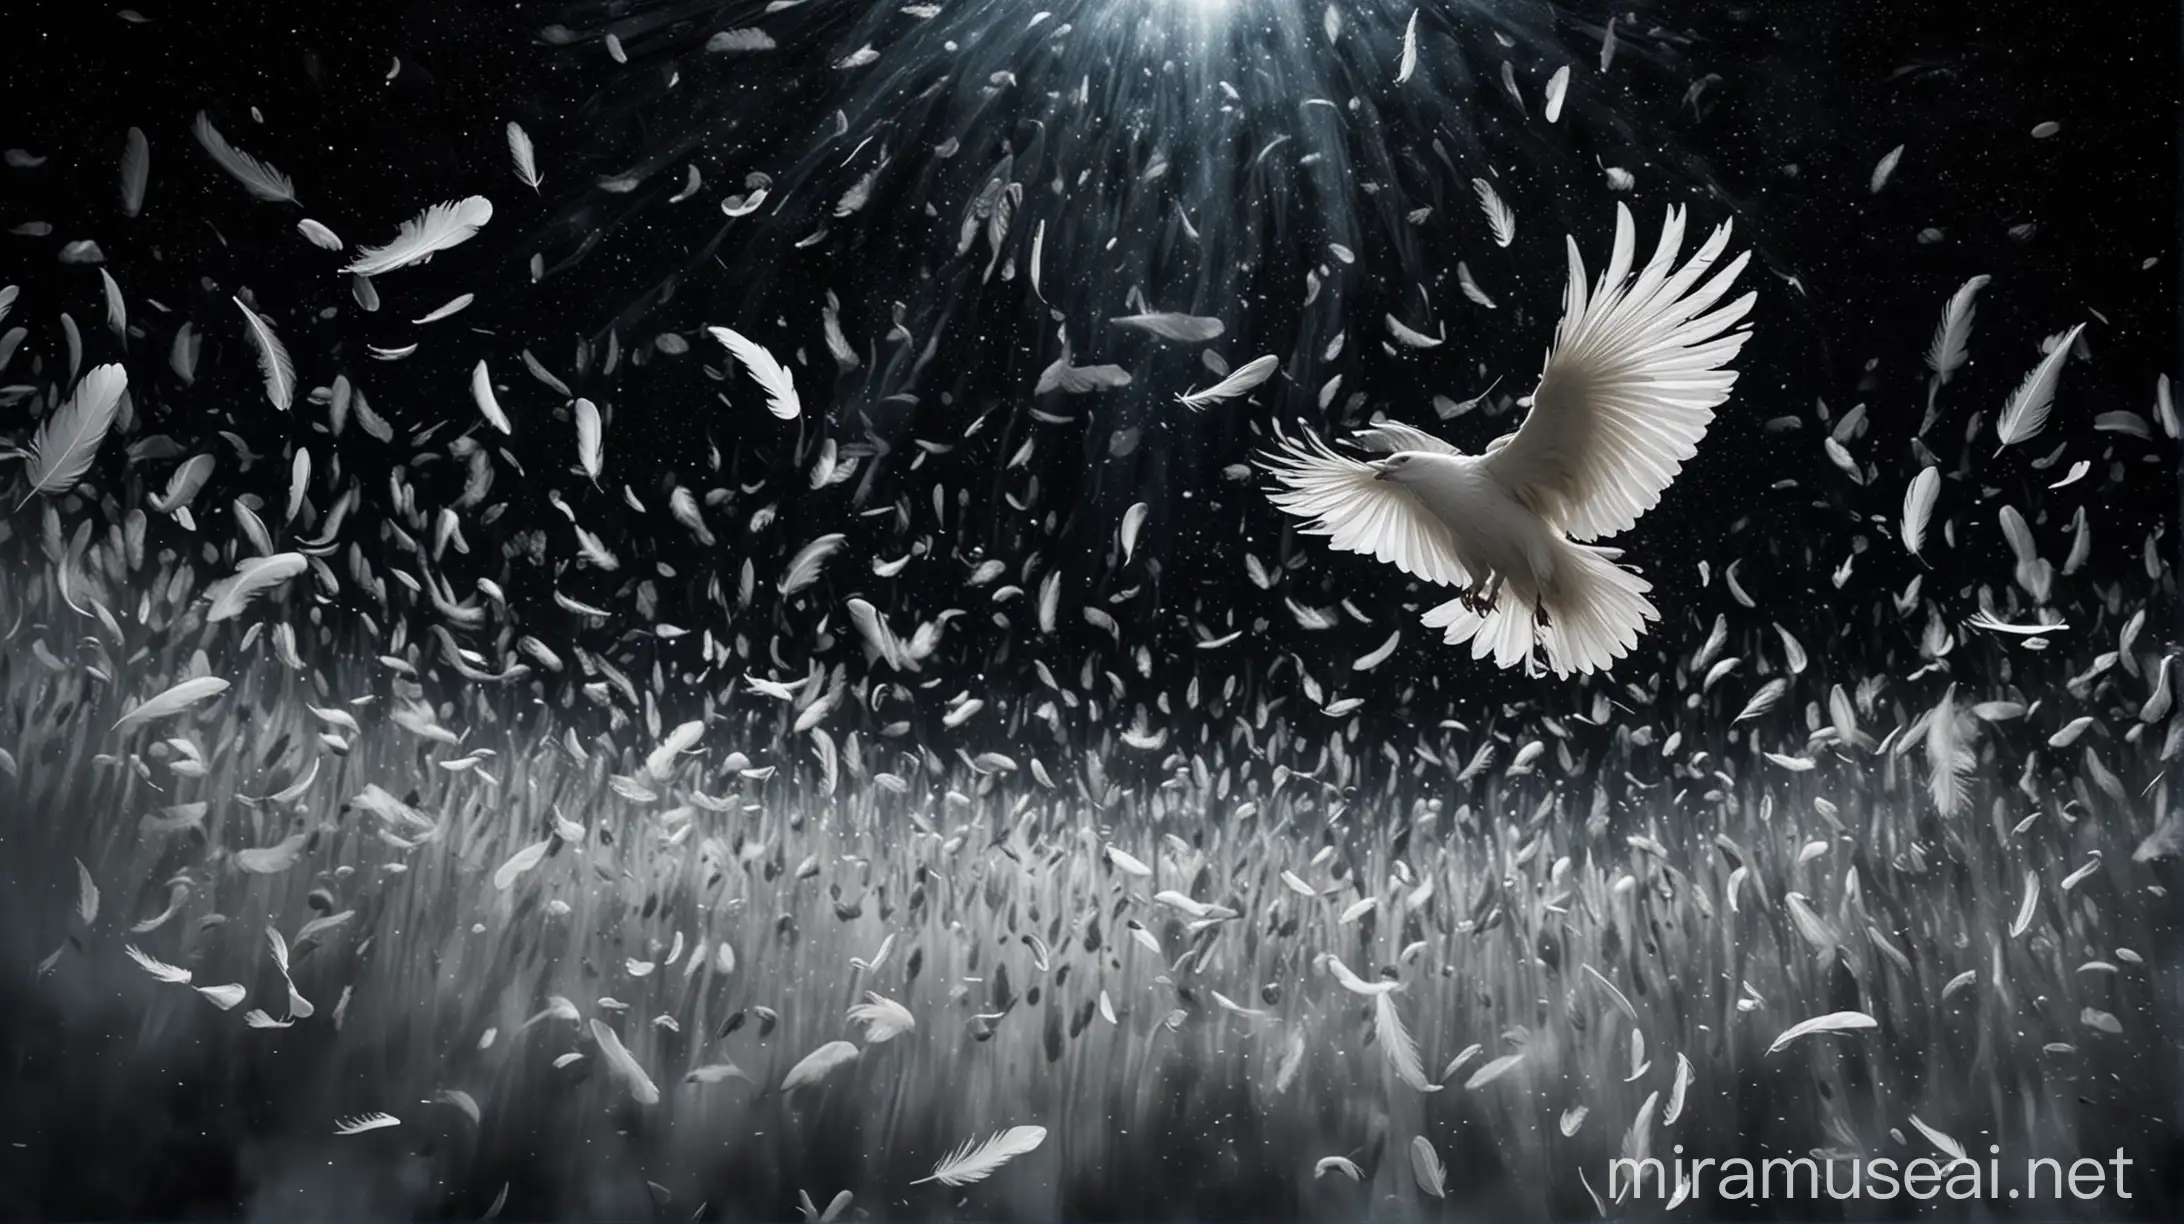 Ethereal White Bird Feathers Falling in Cosmic Darkness